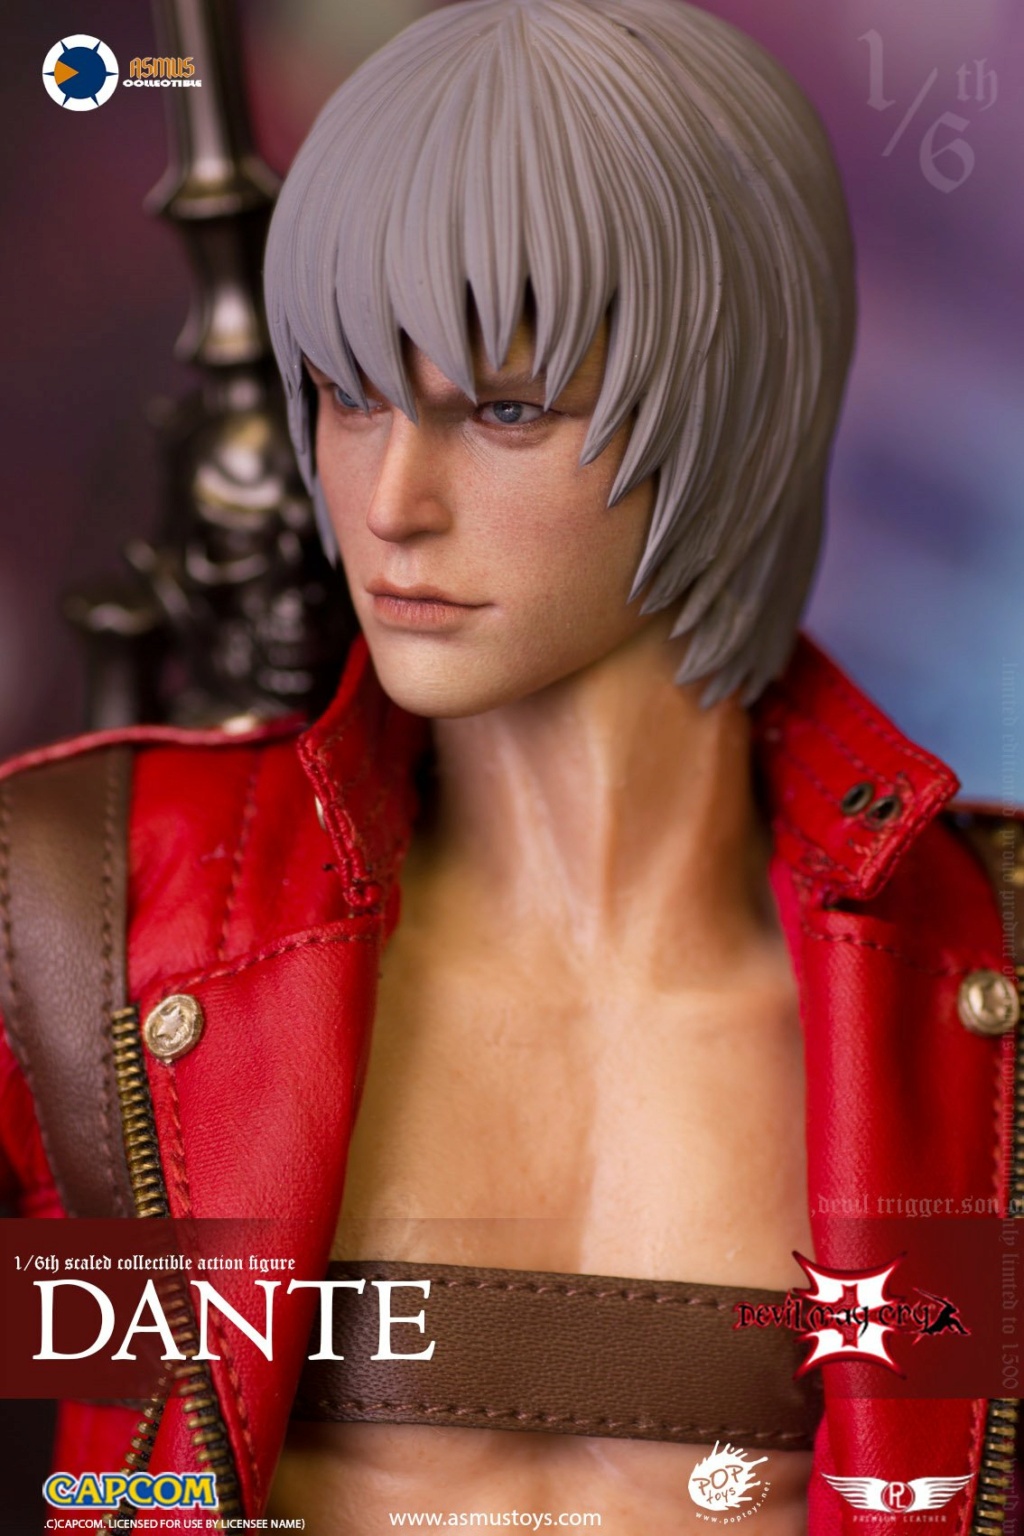 DeviMayCry3 - NEW PRODUCT: Asmus Toys: 1/6 Devil May Cry 3 - DANTE/Dante Standard Edition (DMC300V2) & Deluxe Edition 10462610